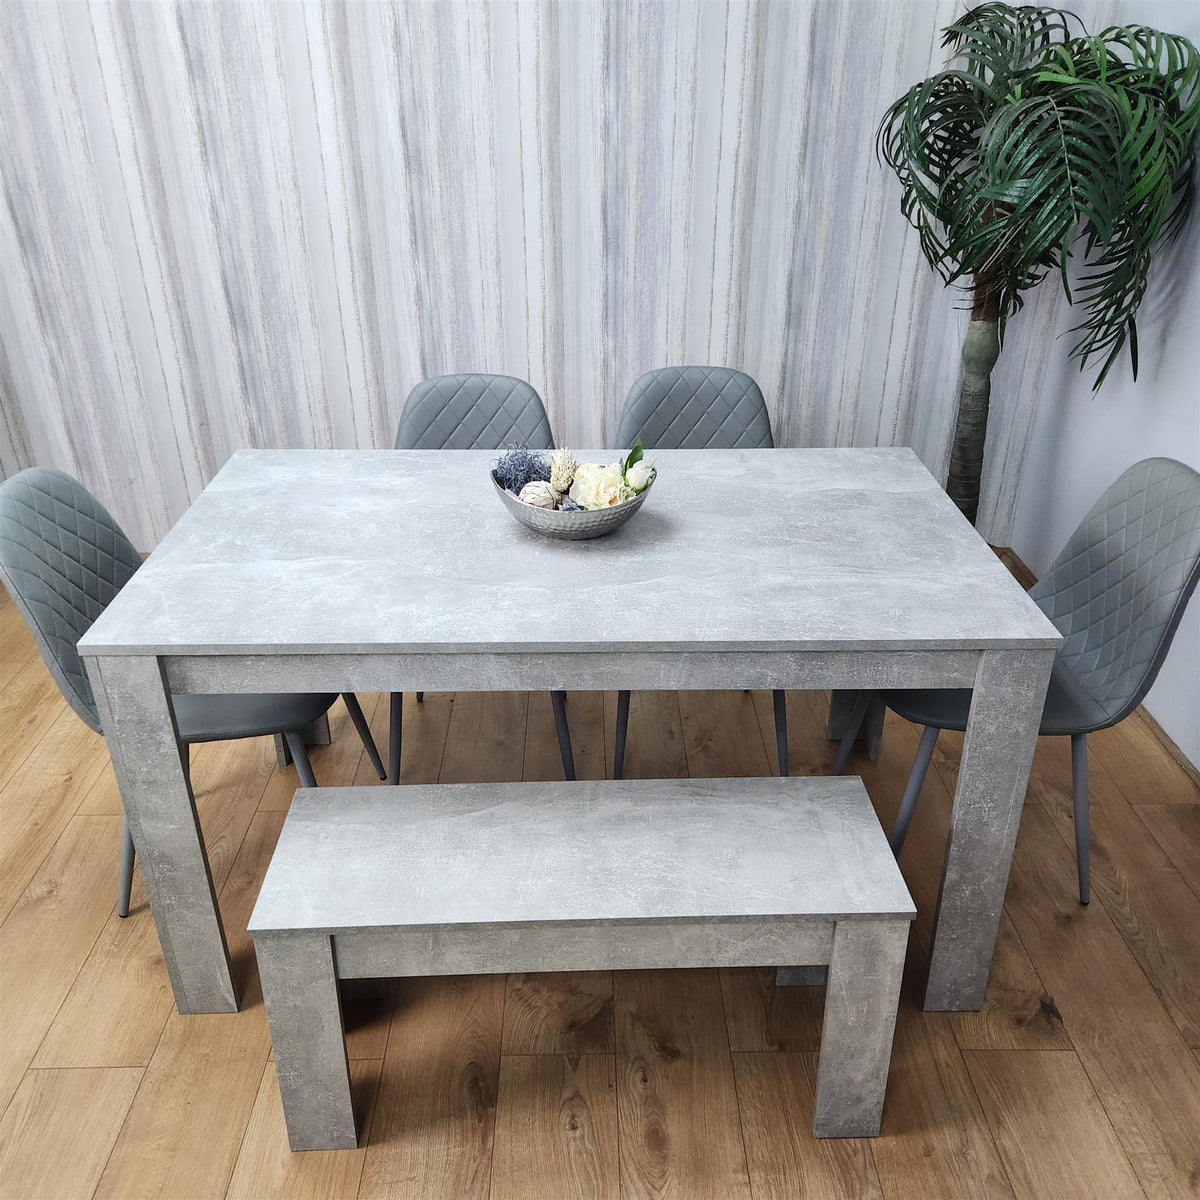 Wooden Rectangle Dining Table Sets with Set of 4 Chairs, a Bench, Grey